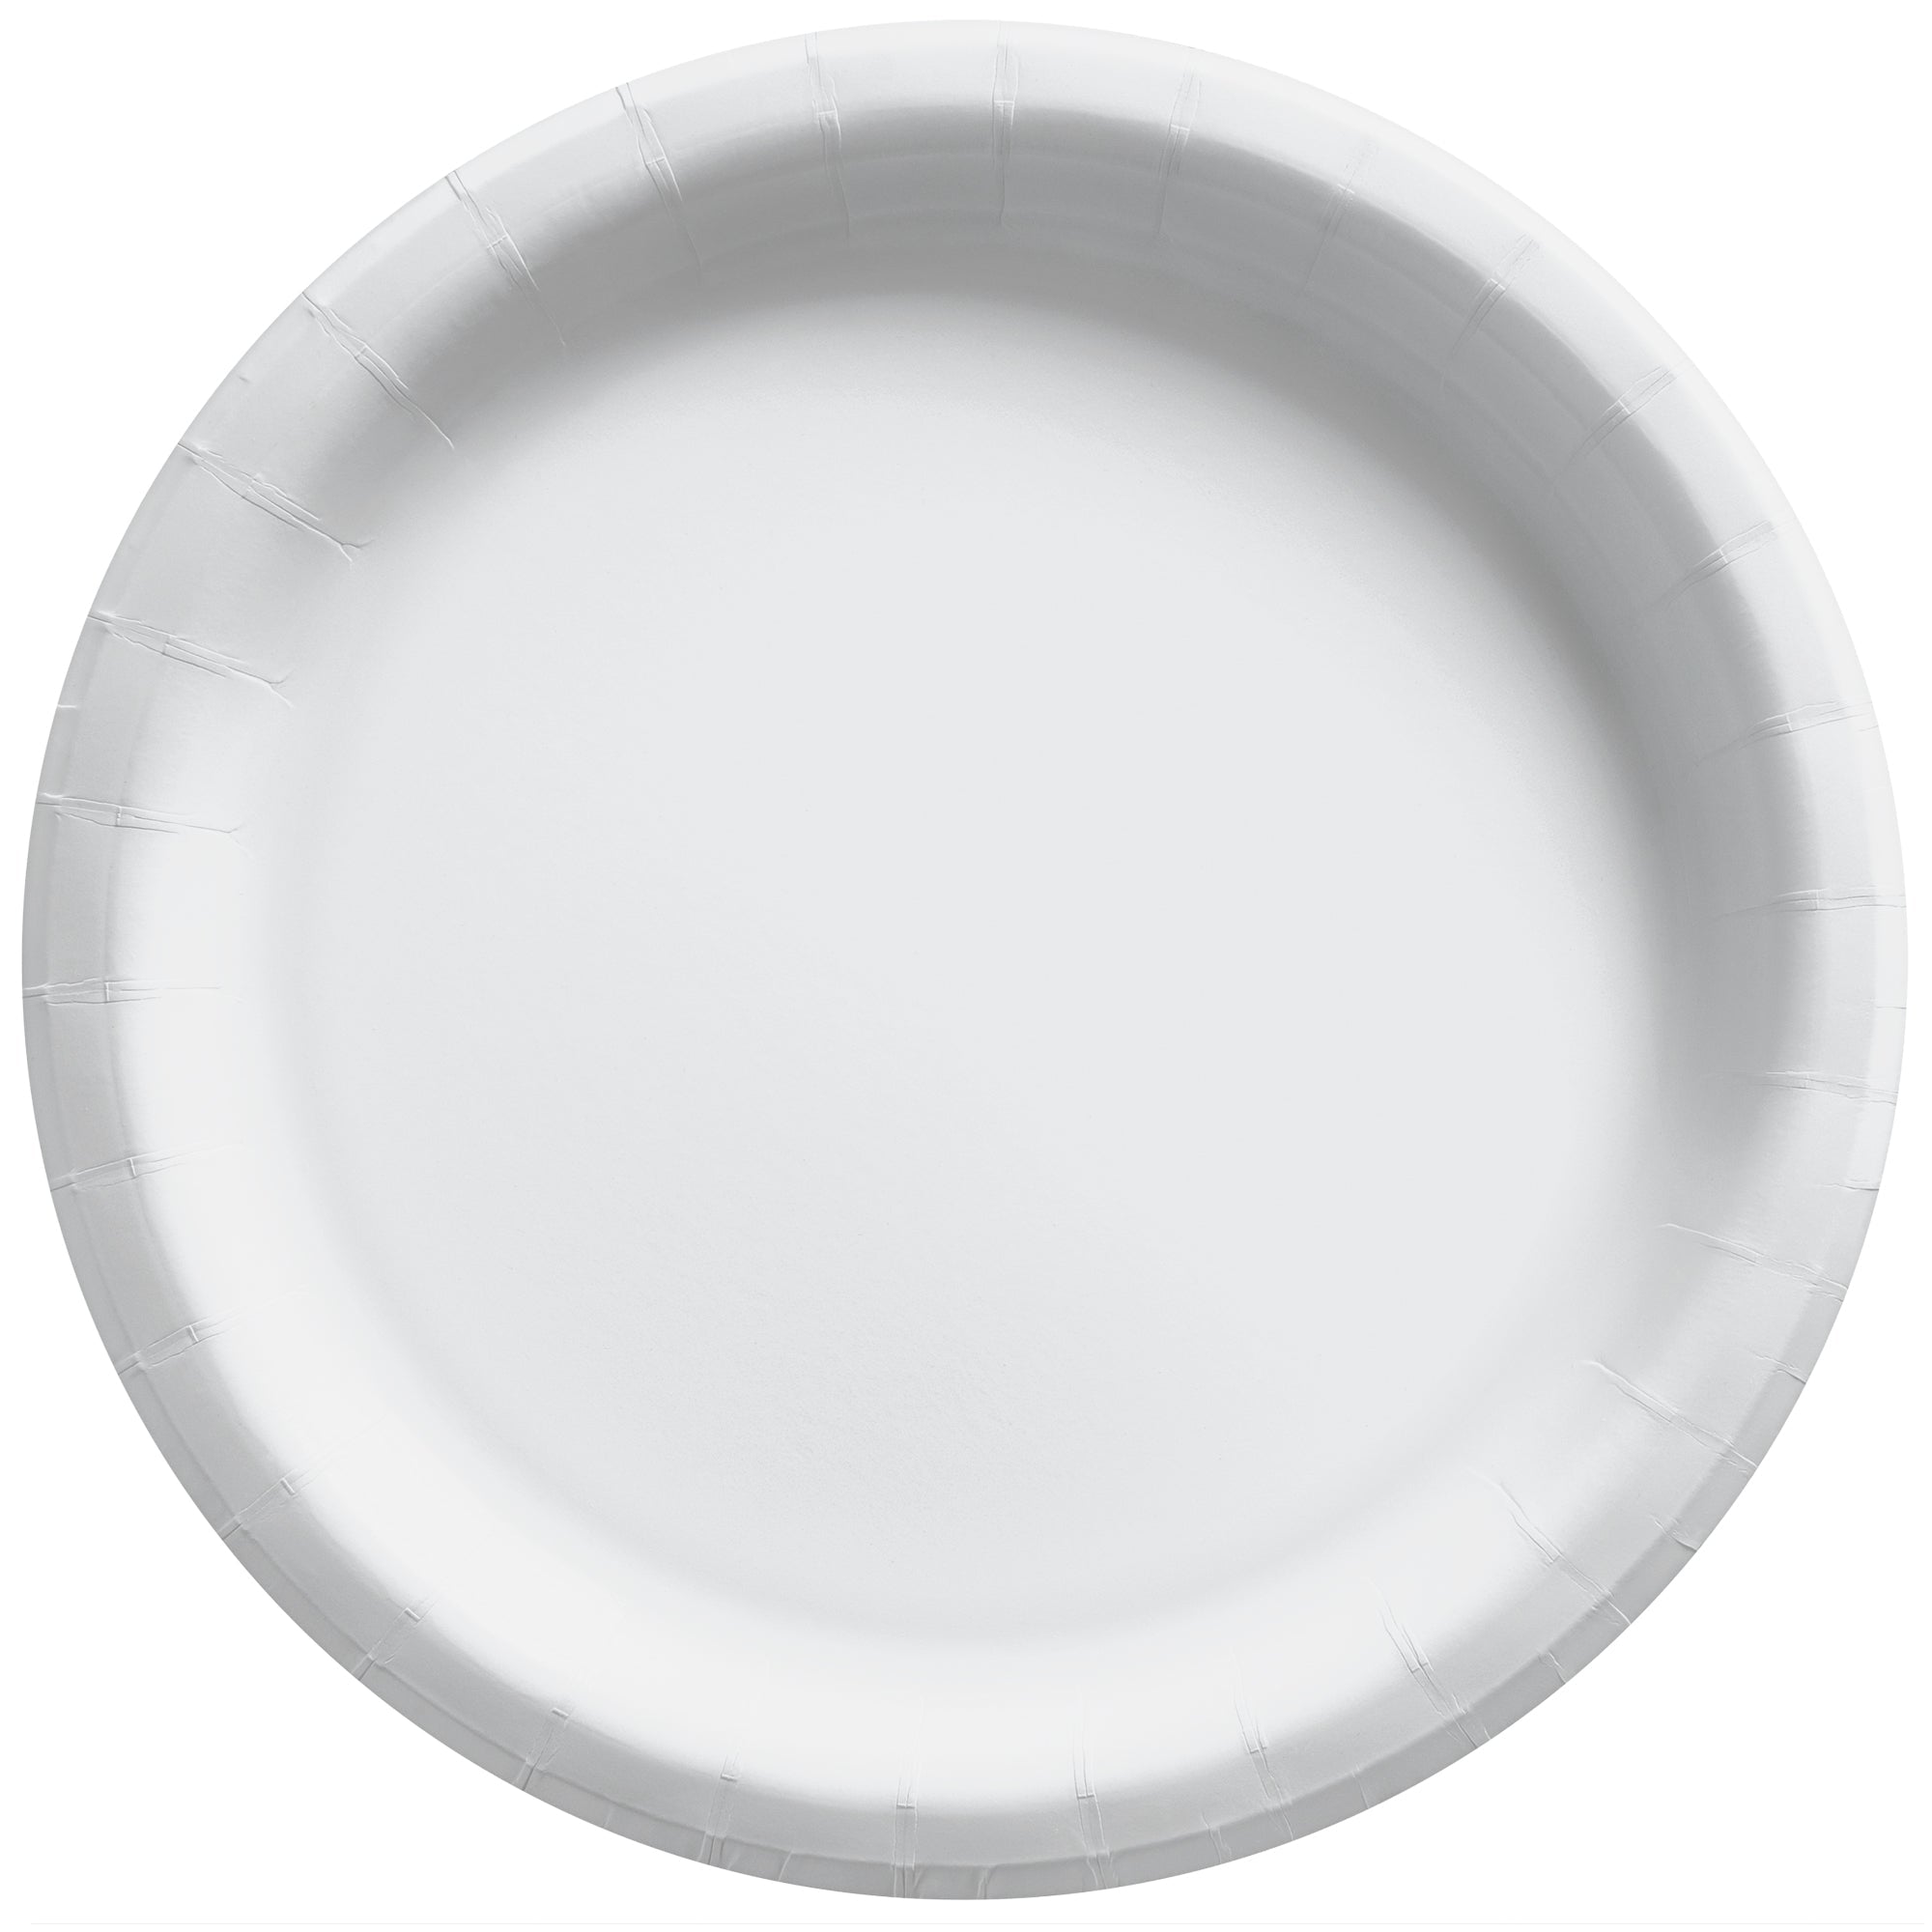 Round Paper Plates  Frosty White  20 pcs  6.75in